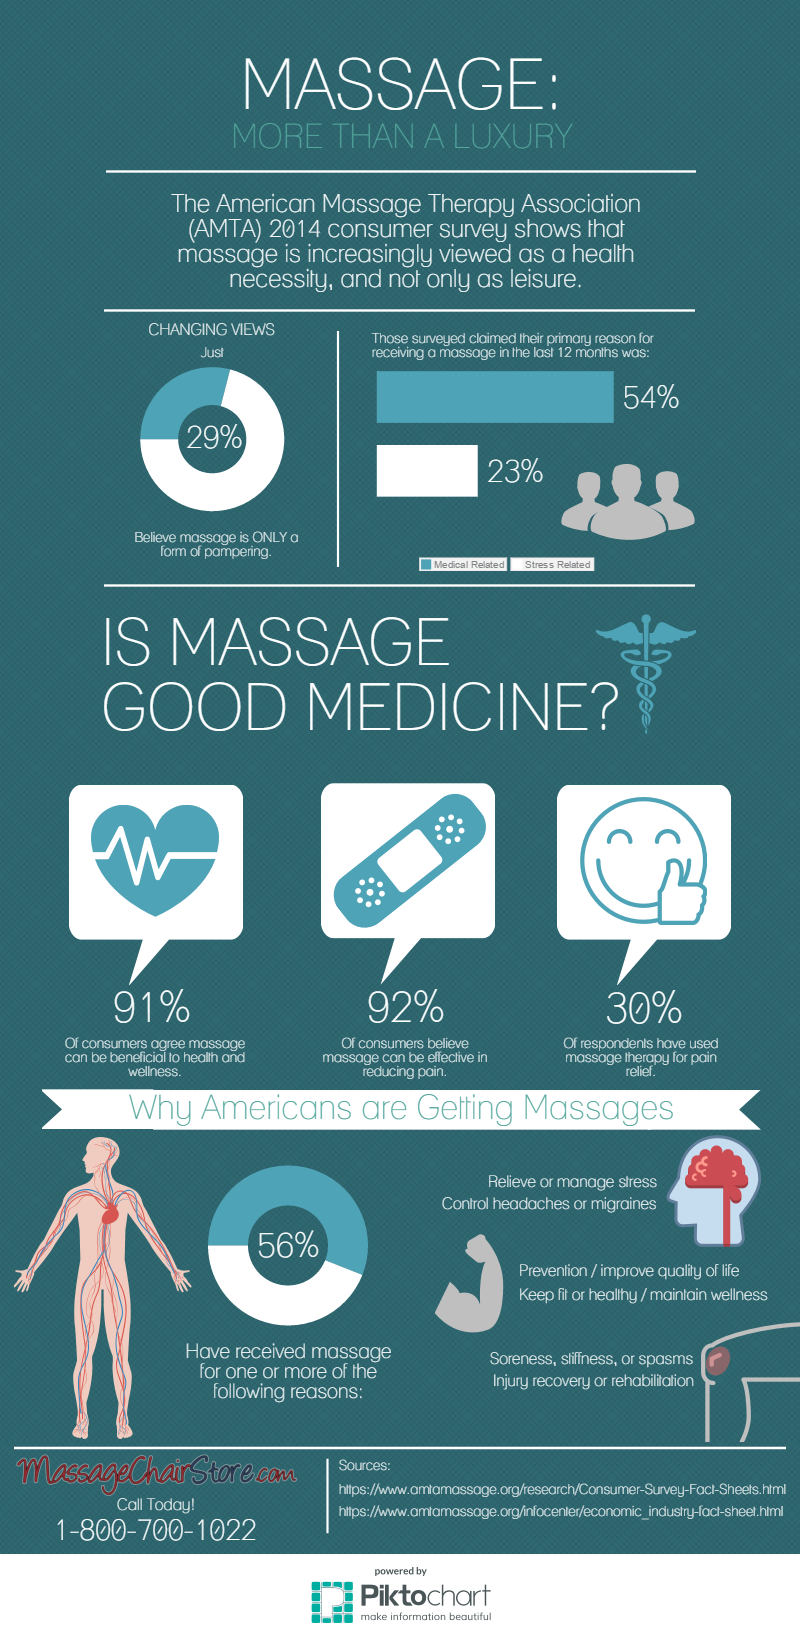 Infographic about the changing views of massage therapy